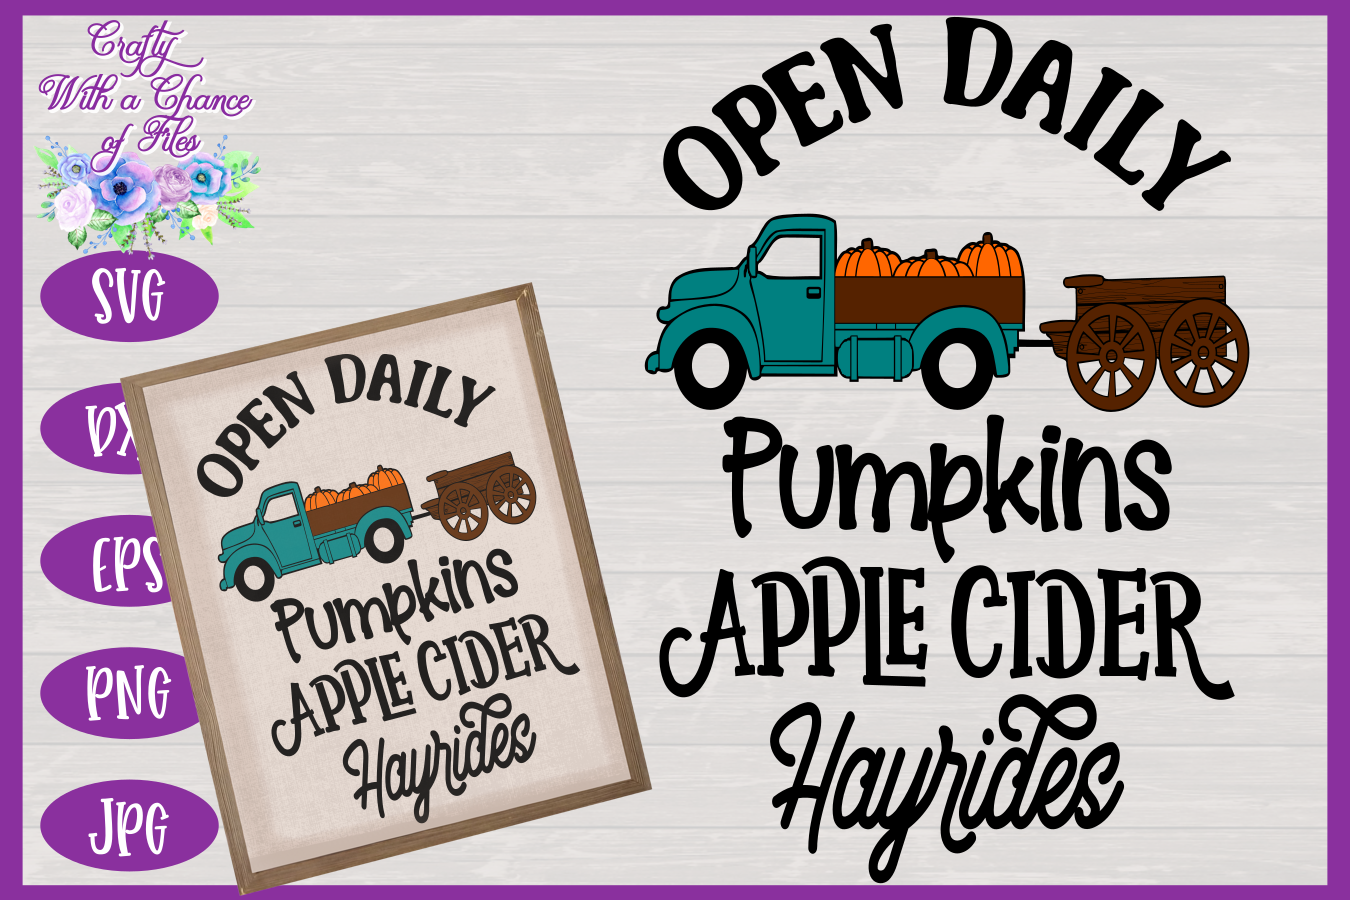 Farm Open Daily Svg Pumpkin Truck Svg Fall Svg Autumn Svg Farm By Crafty With A Chance Of Files Thehungryjpeg Com